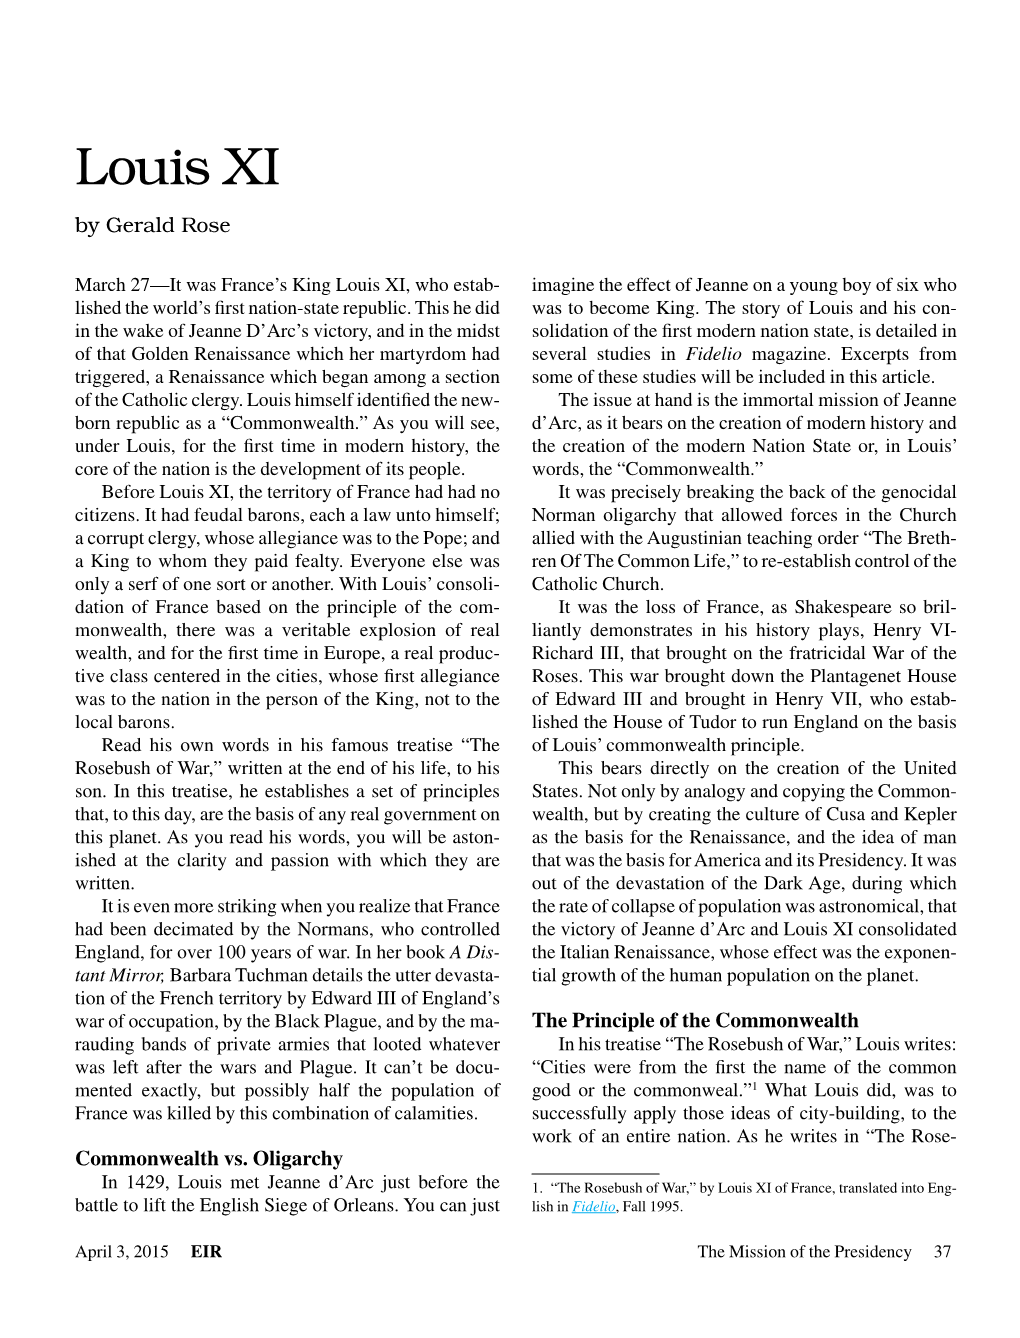 Louis XI by Gerald Rose